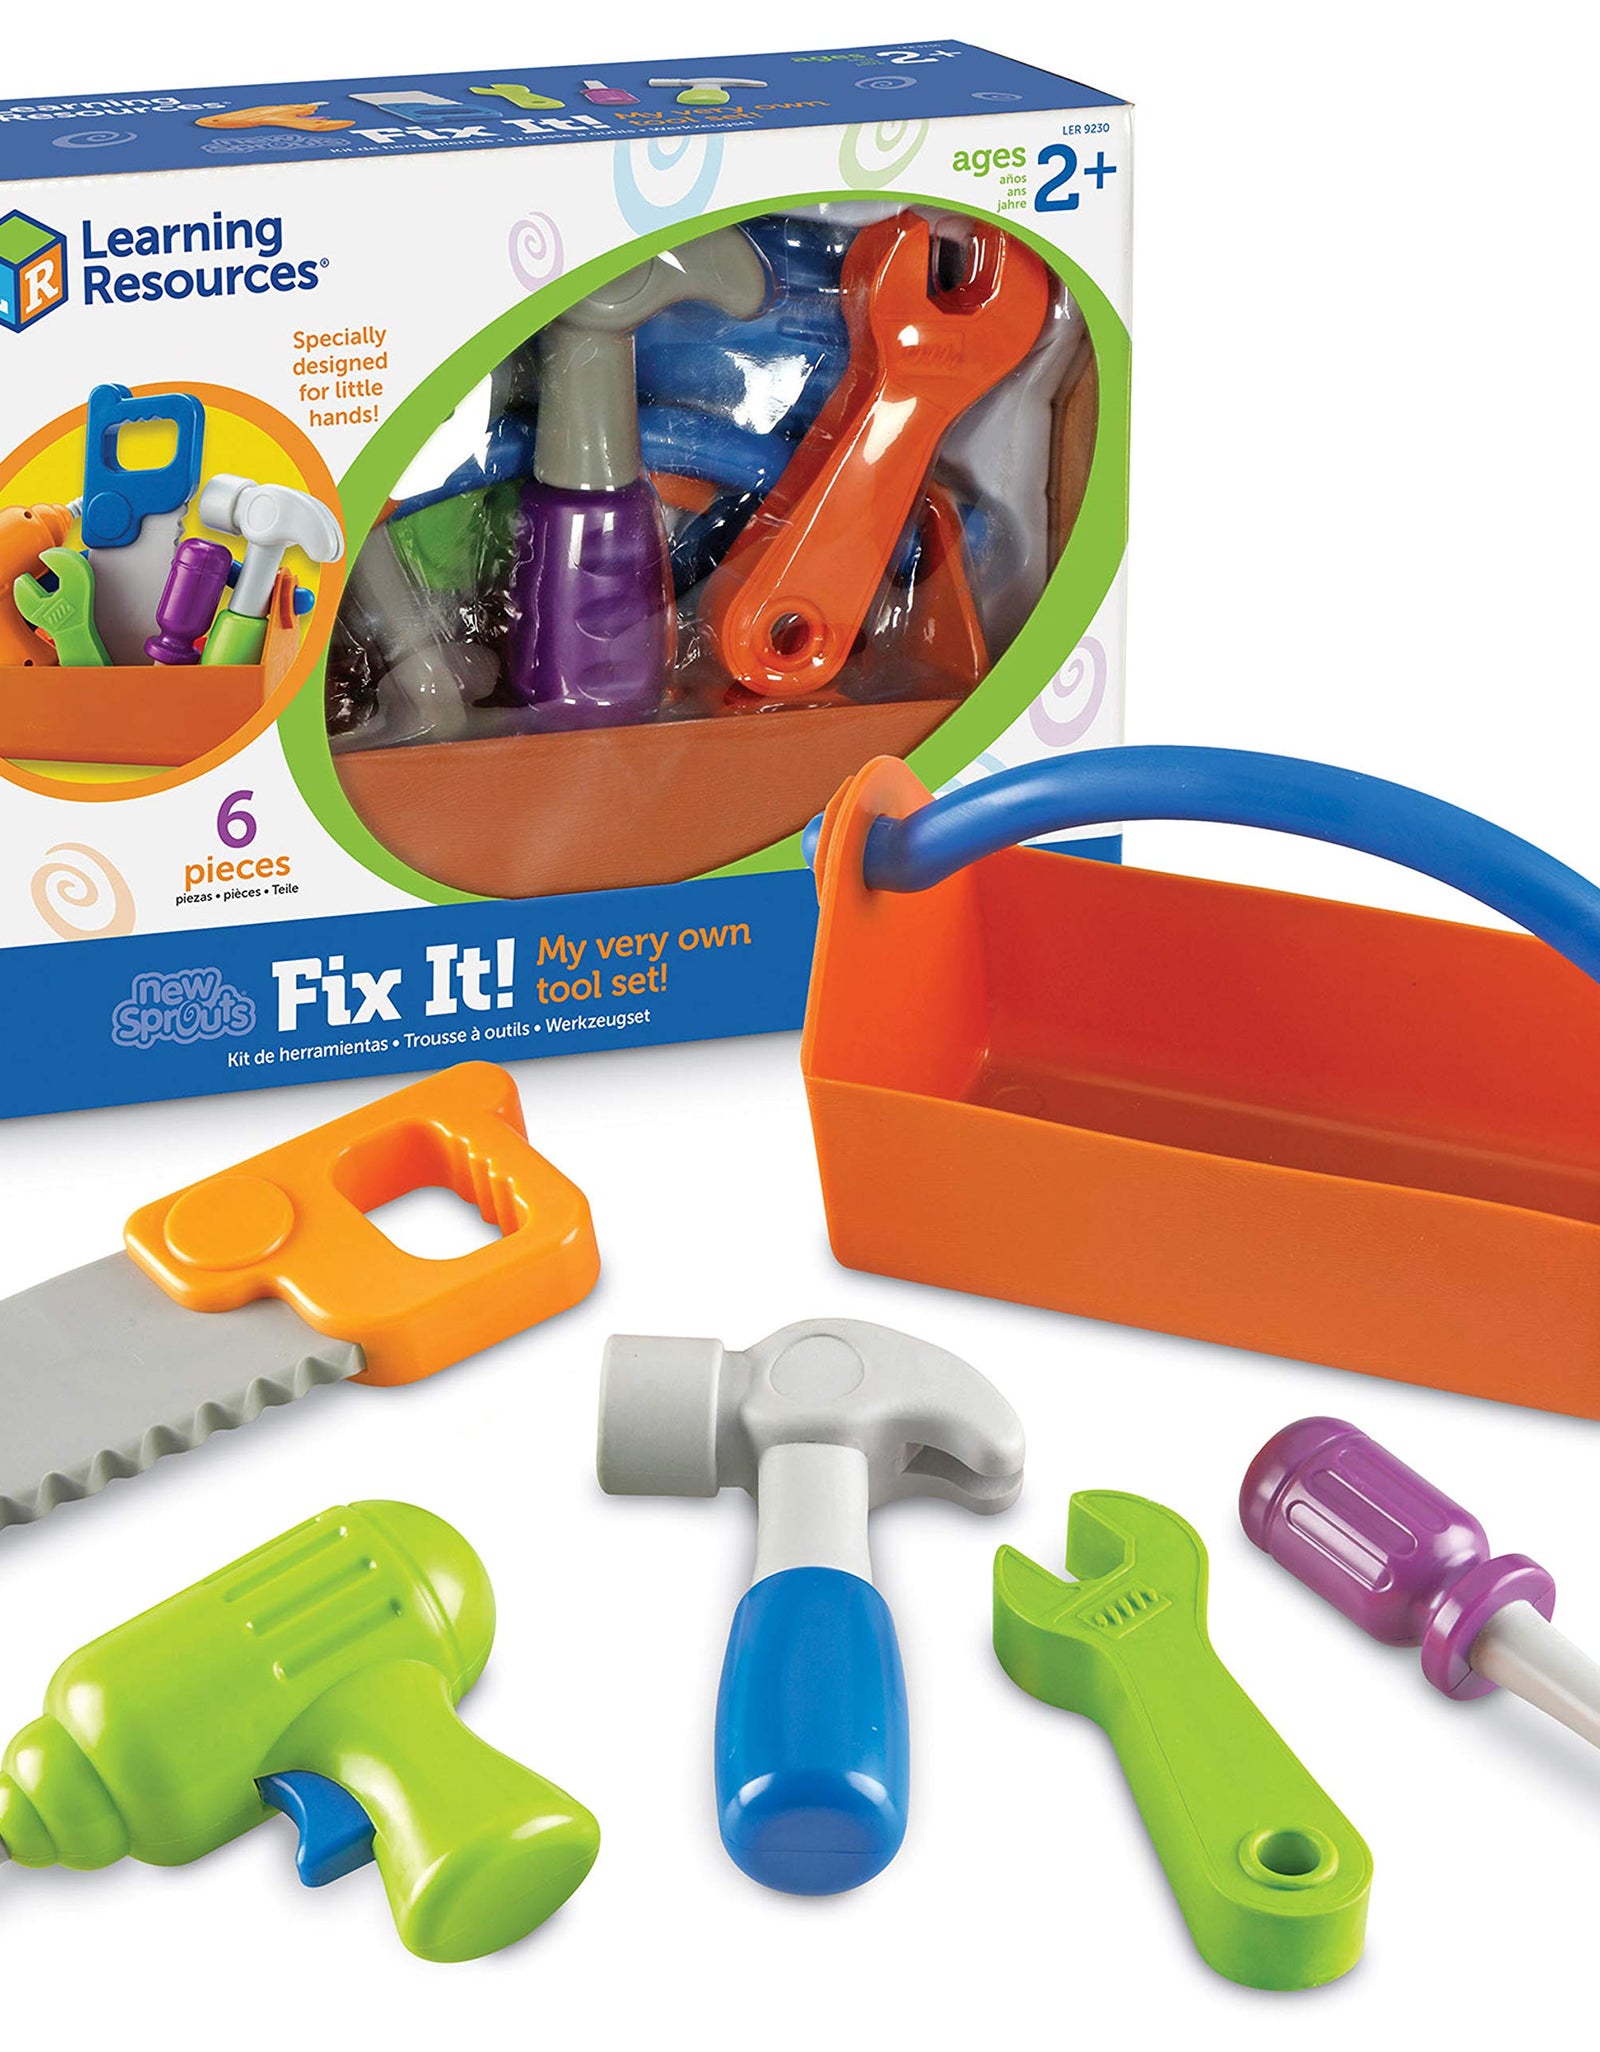 Learning Resources New Sprouts Fix It!, Fine Motor Tools for Toddlers, Pretend Play Toy Tool Set, Outdoor Toys, 6 Piece, Ages 2+